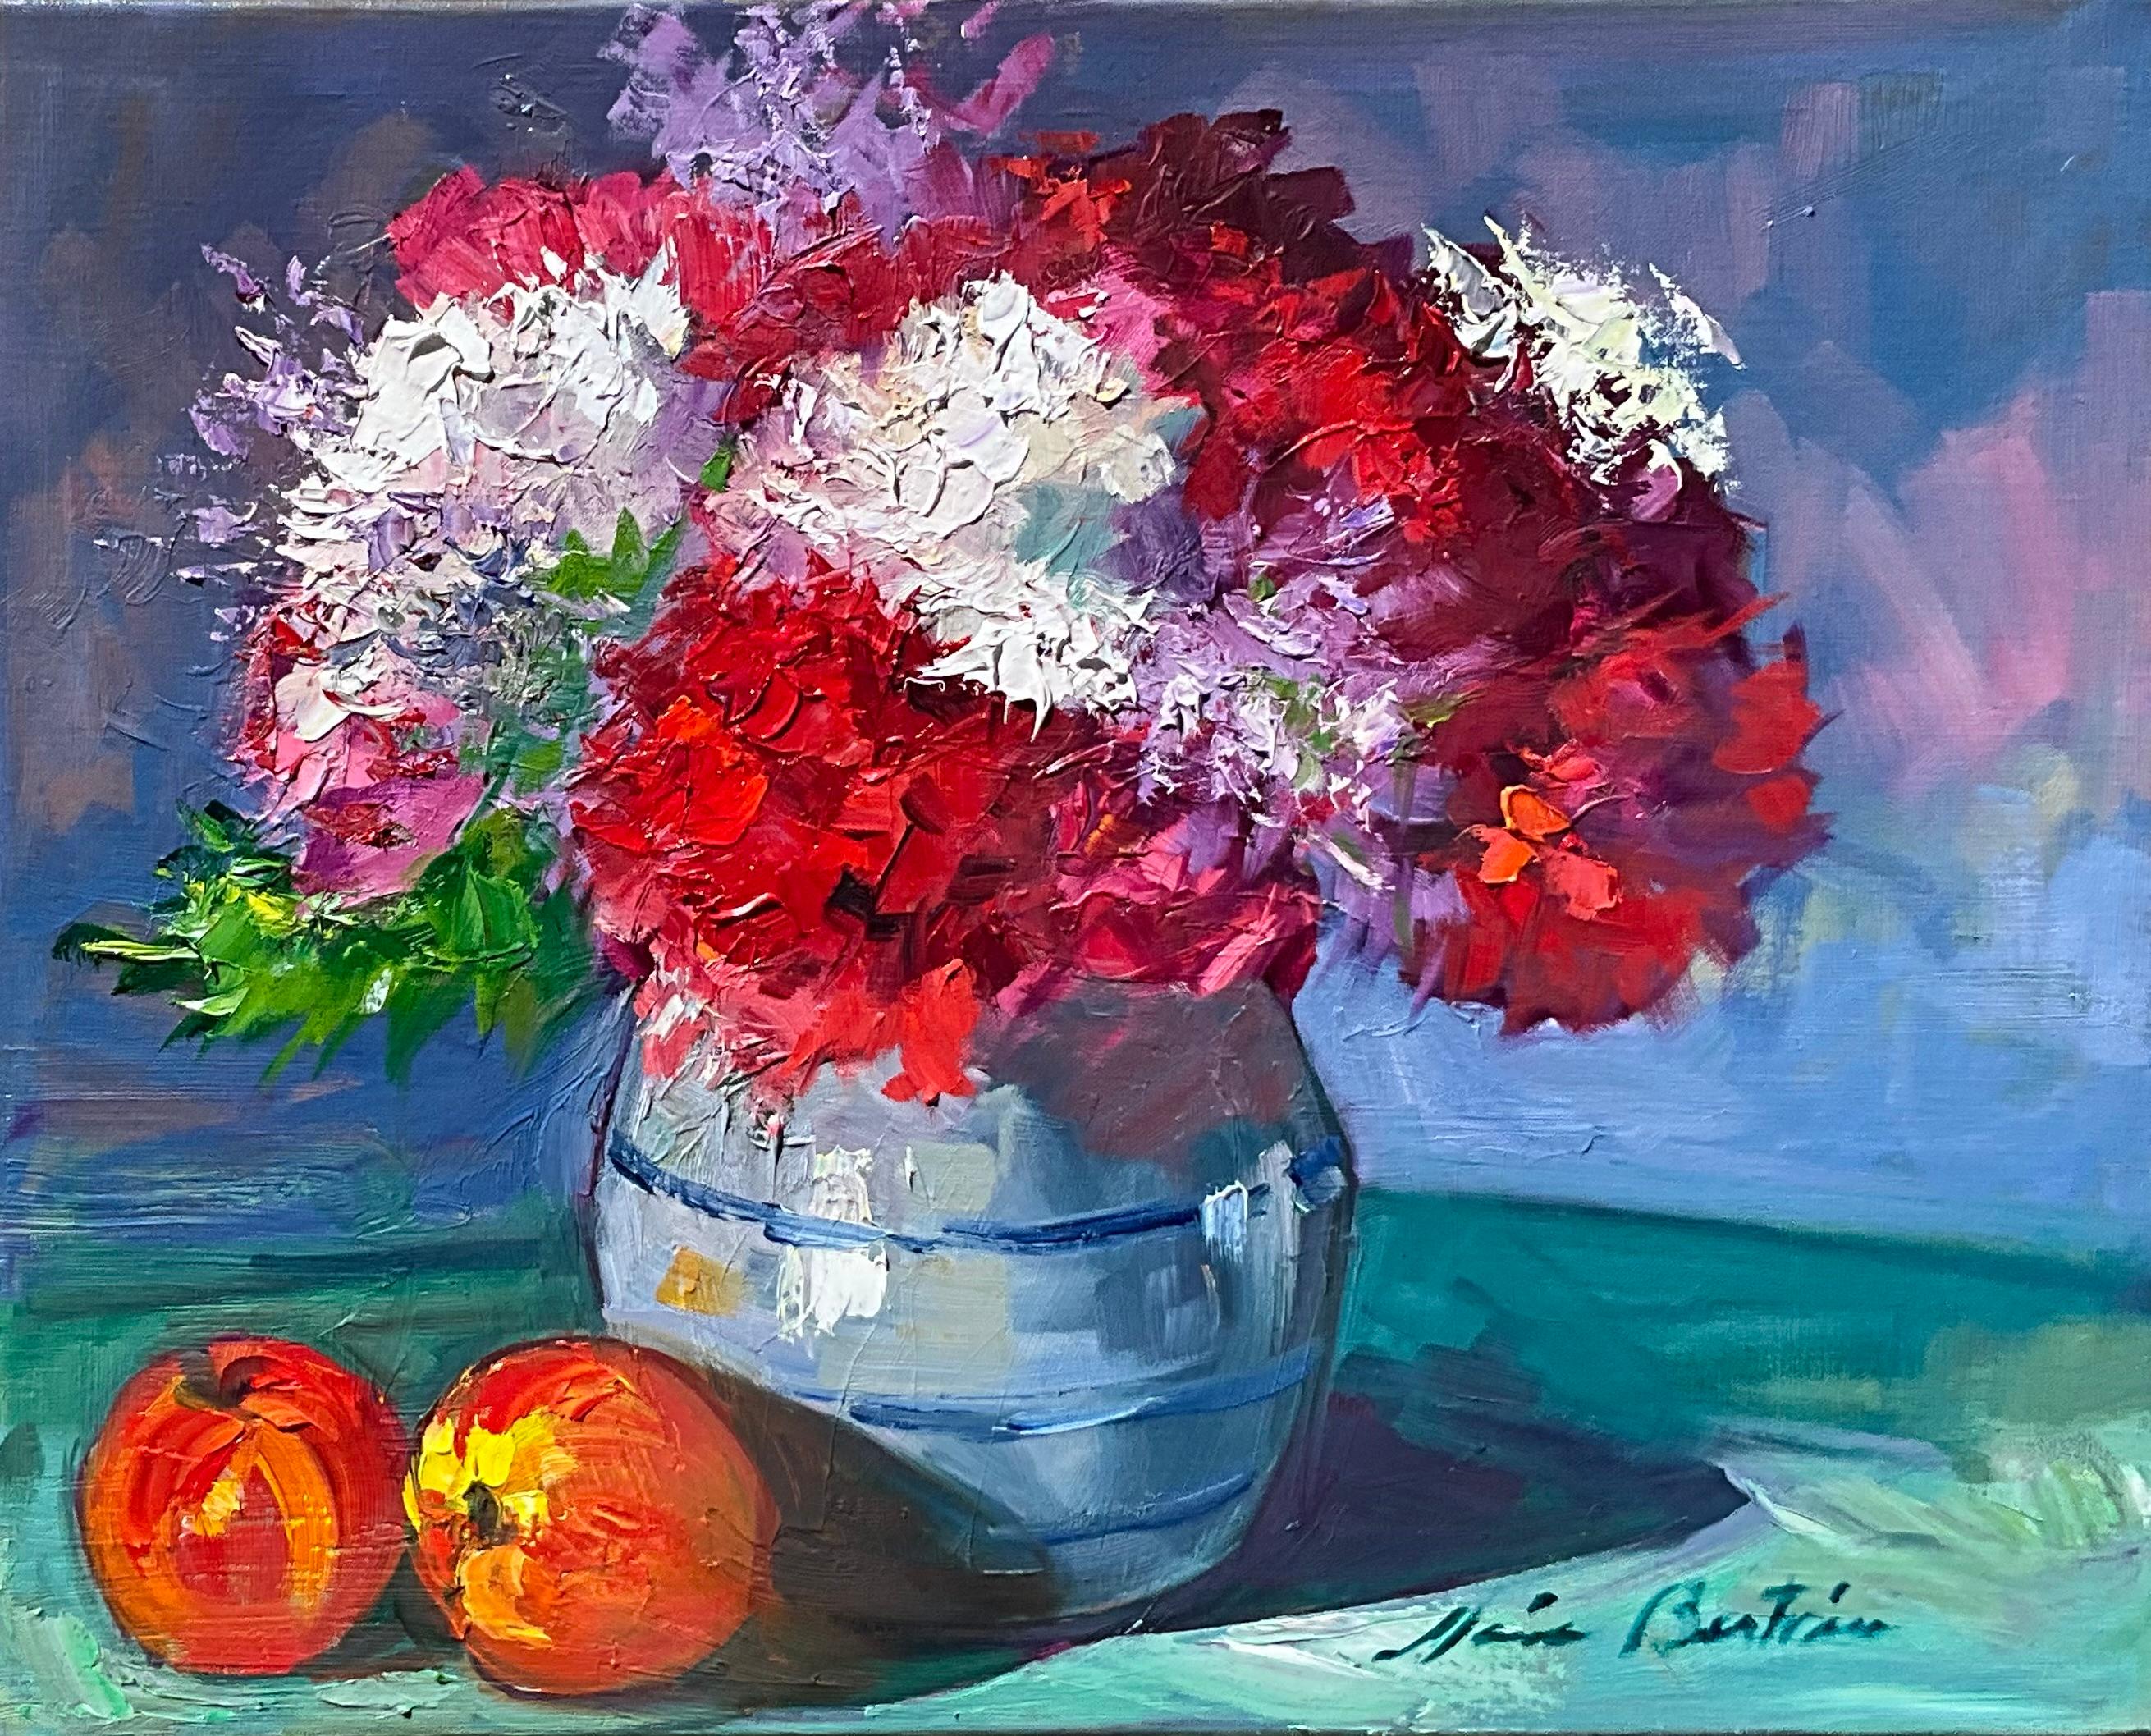 Maria Bertrán Still-Life Painting - "White and Red Peonies" Contemporary Impressionist Still Life Oil